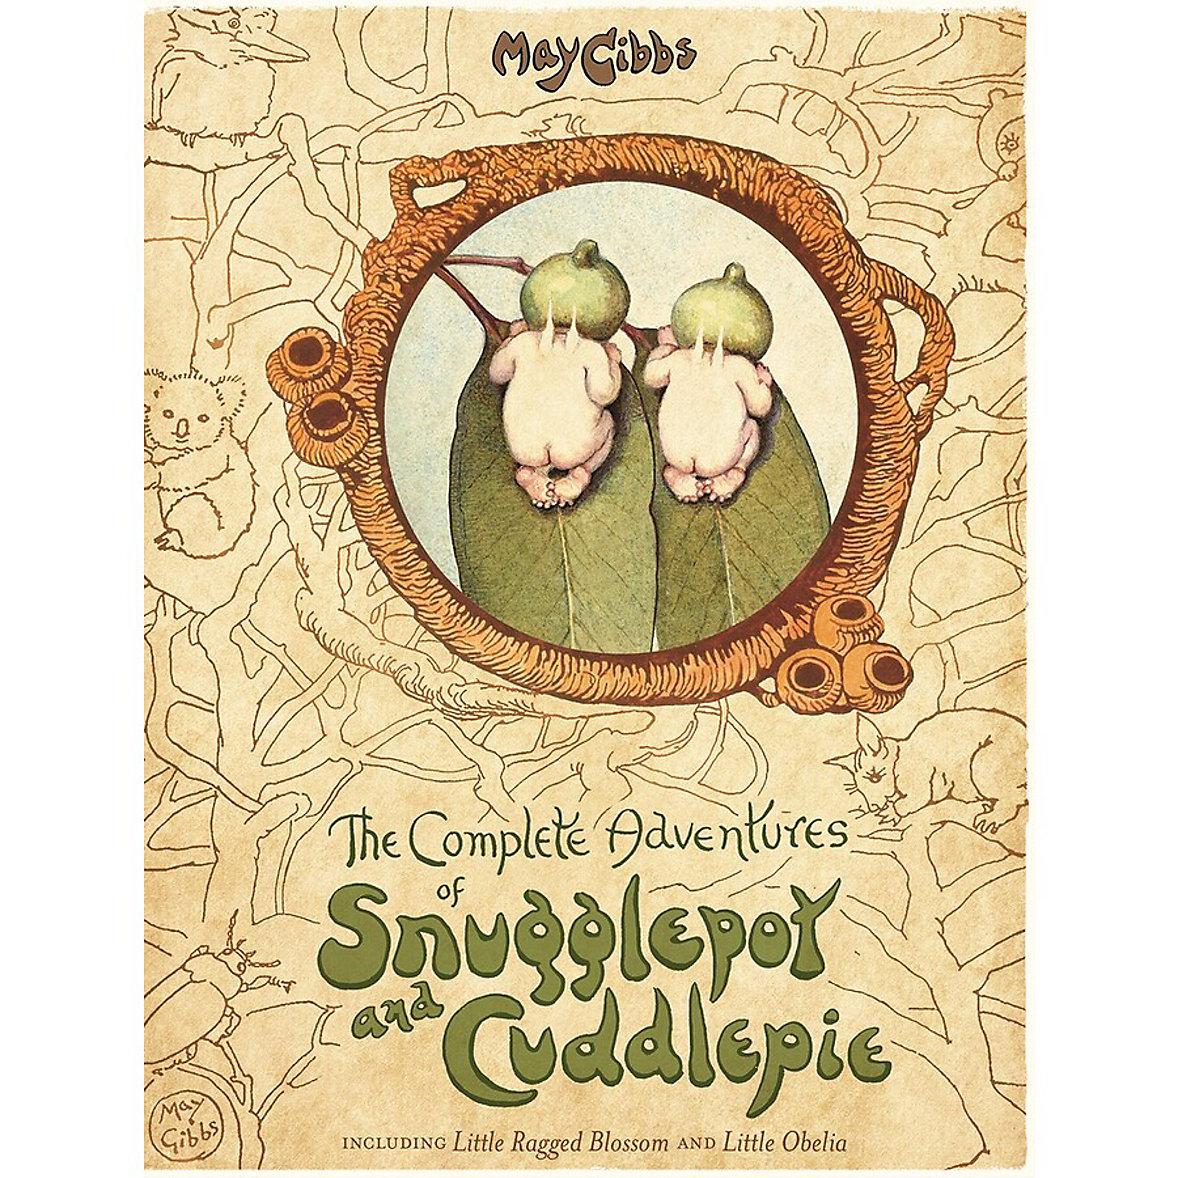 Complete Adventures of Snupplepot and Cuddlepie